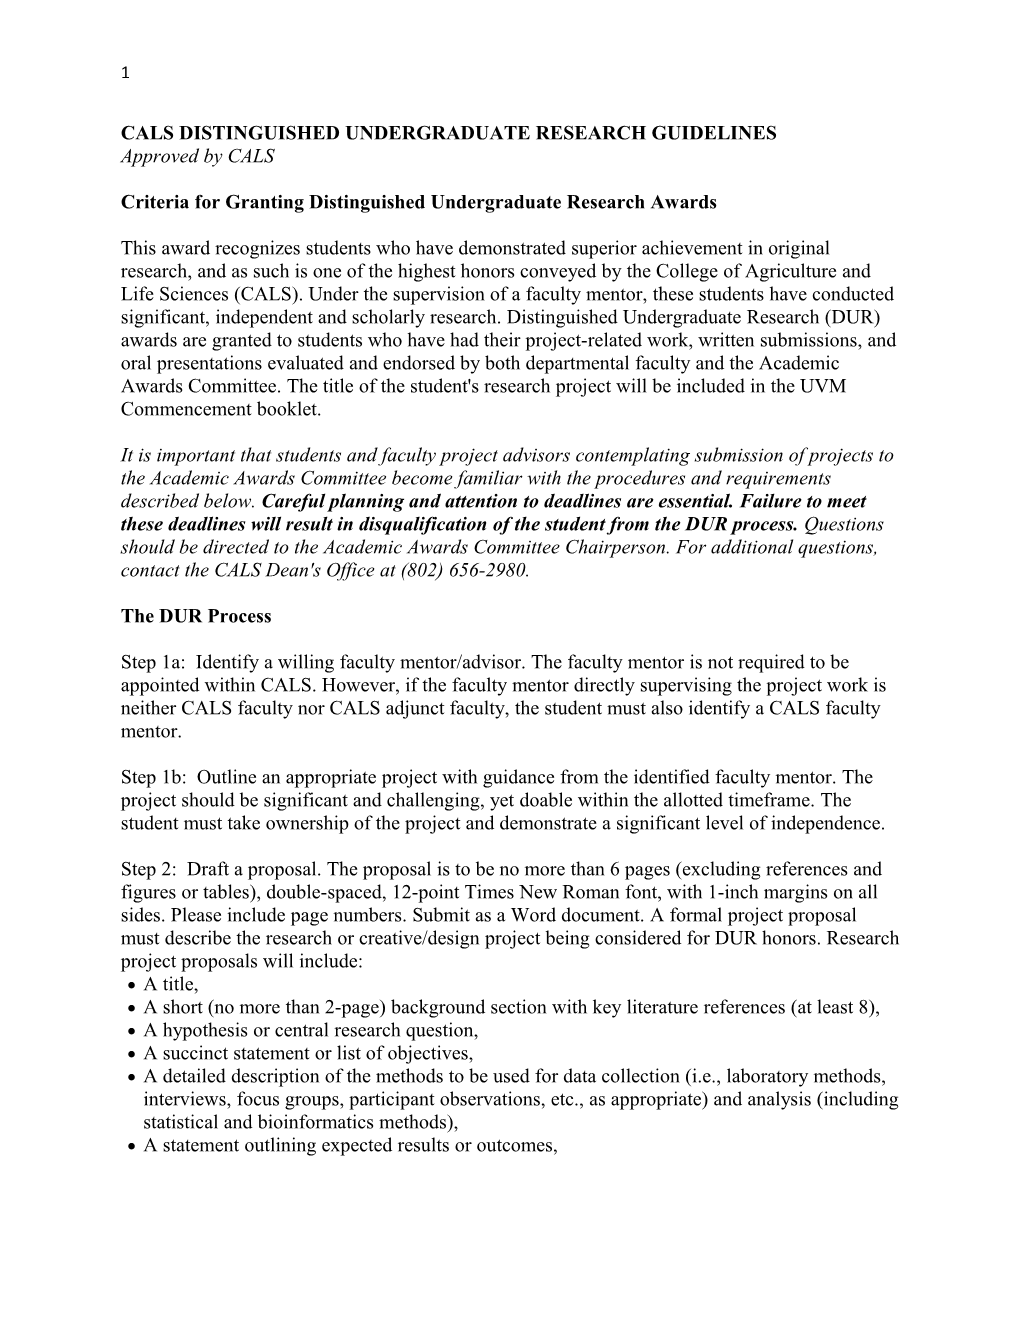 Cals Distinguished Undergraduate Research Guidelines